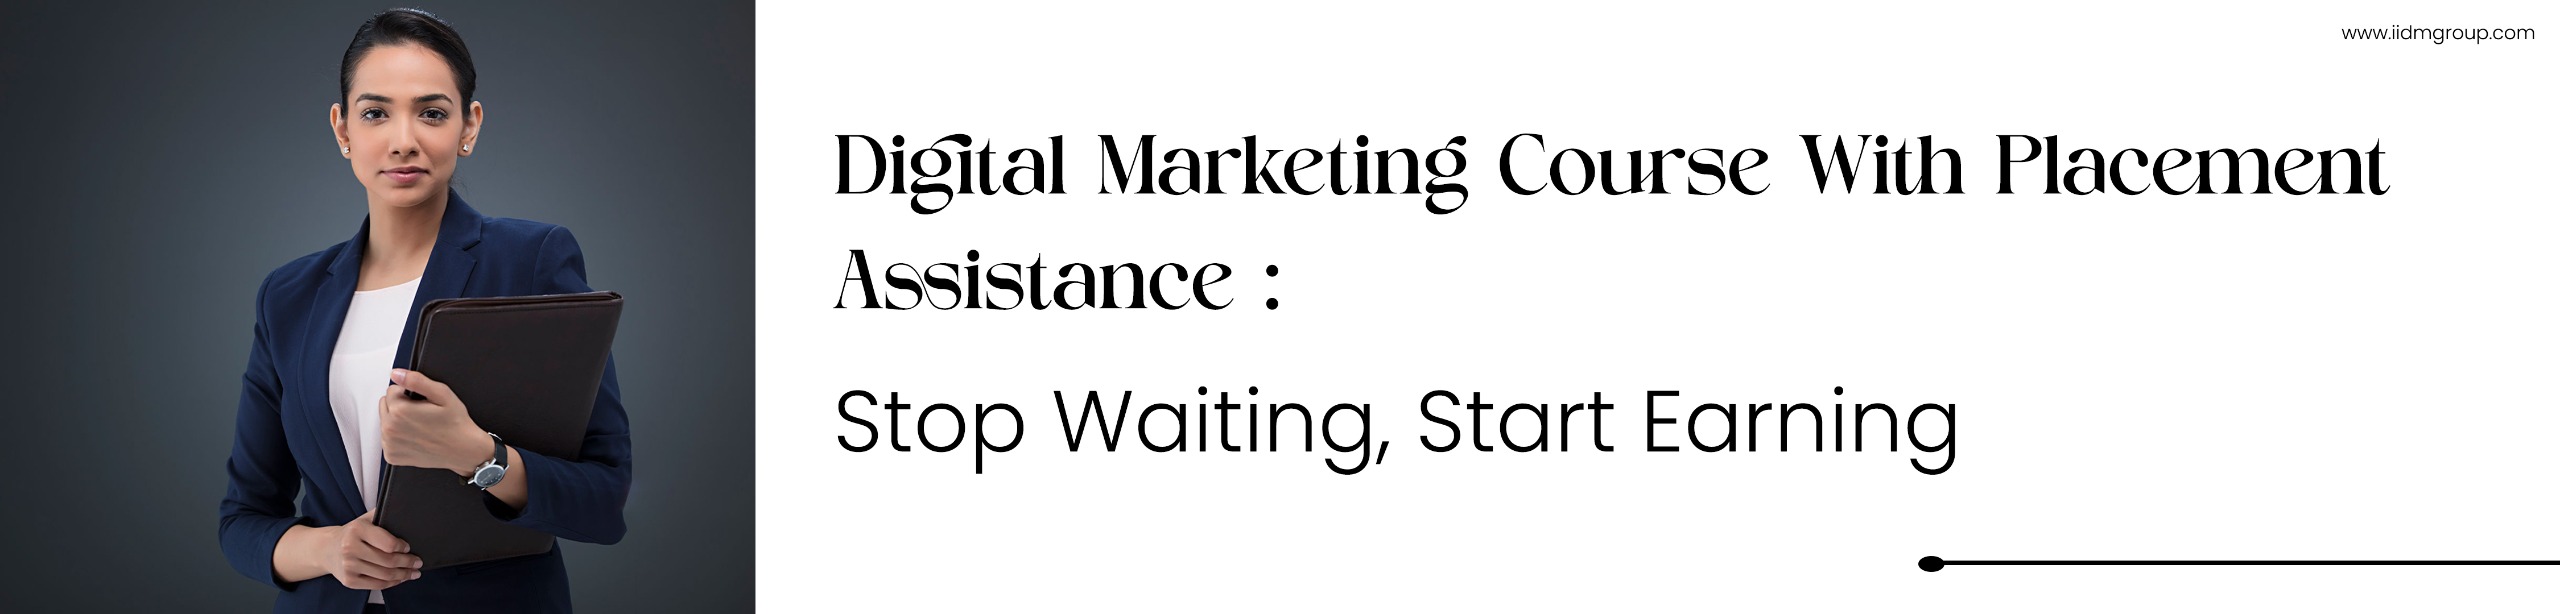 Digital Marketing Course with Placement Assistance : Stop waiting, Start Earning